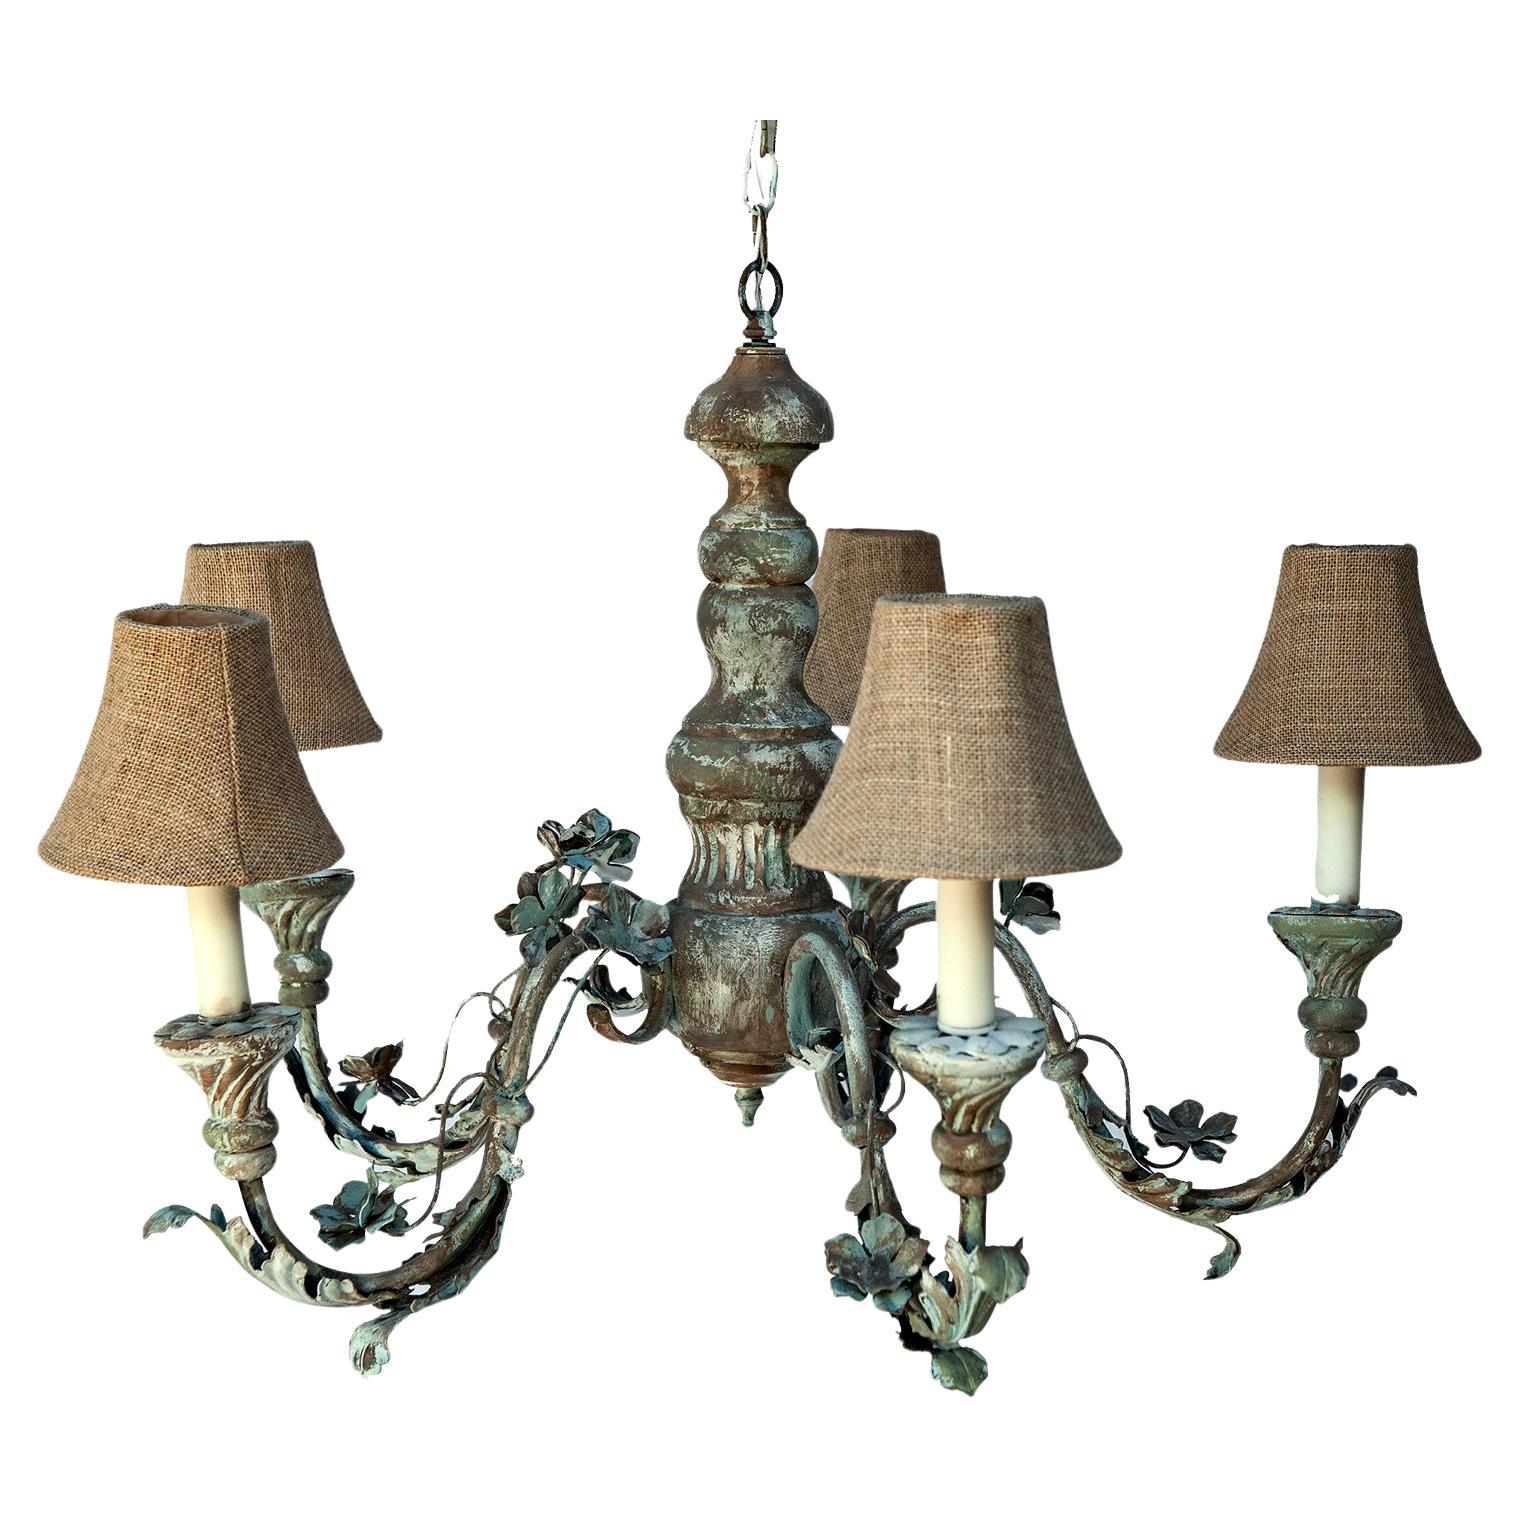 Five Arm Greige Metal Chandelier with Fluted Wood Cups.
Vintage Italian rustic five arm wood & metal chandelier. Metal Floral arms with walnut tone wood base & candle holders. European faux wax candle holders.
Height including the chain is 32